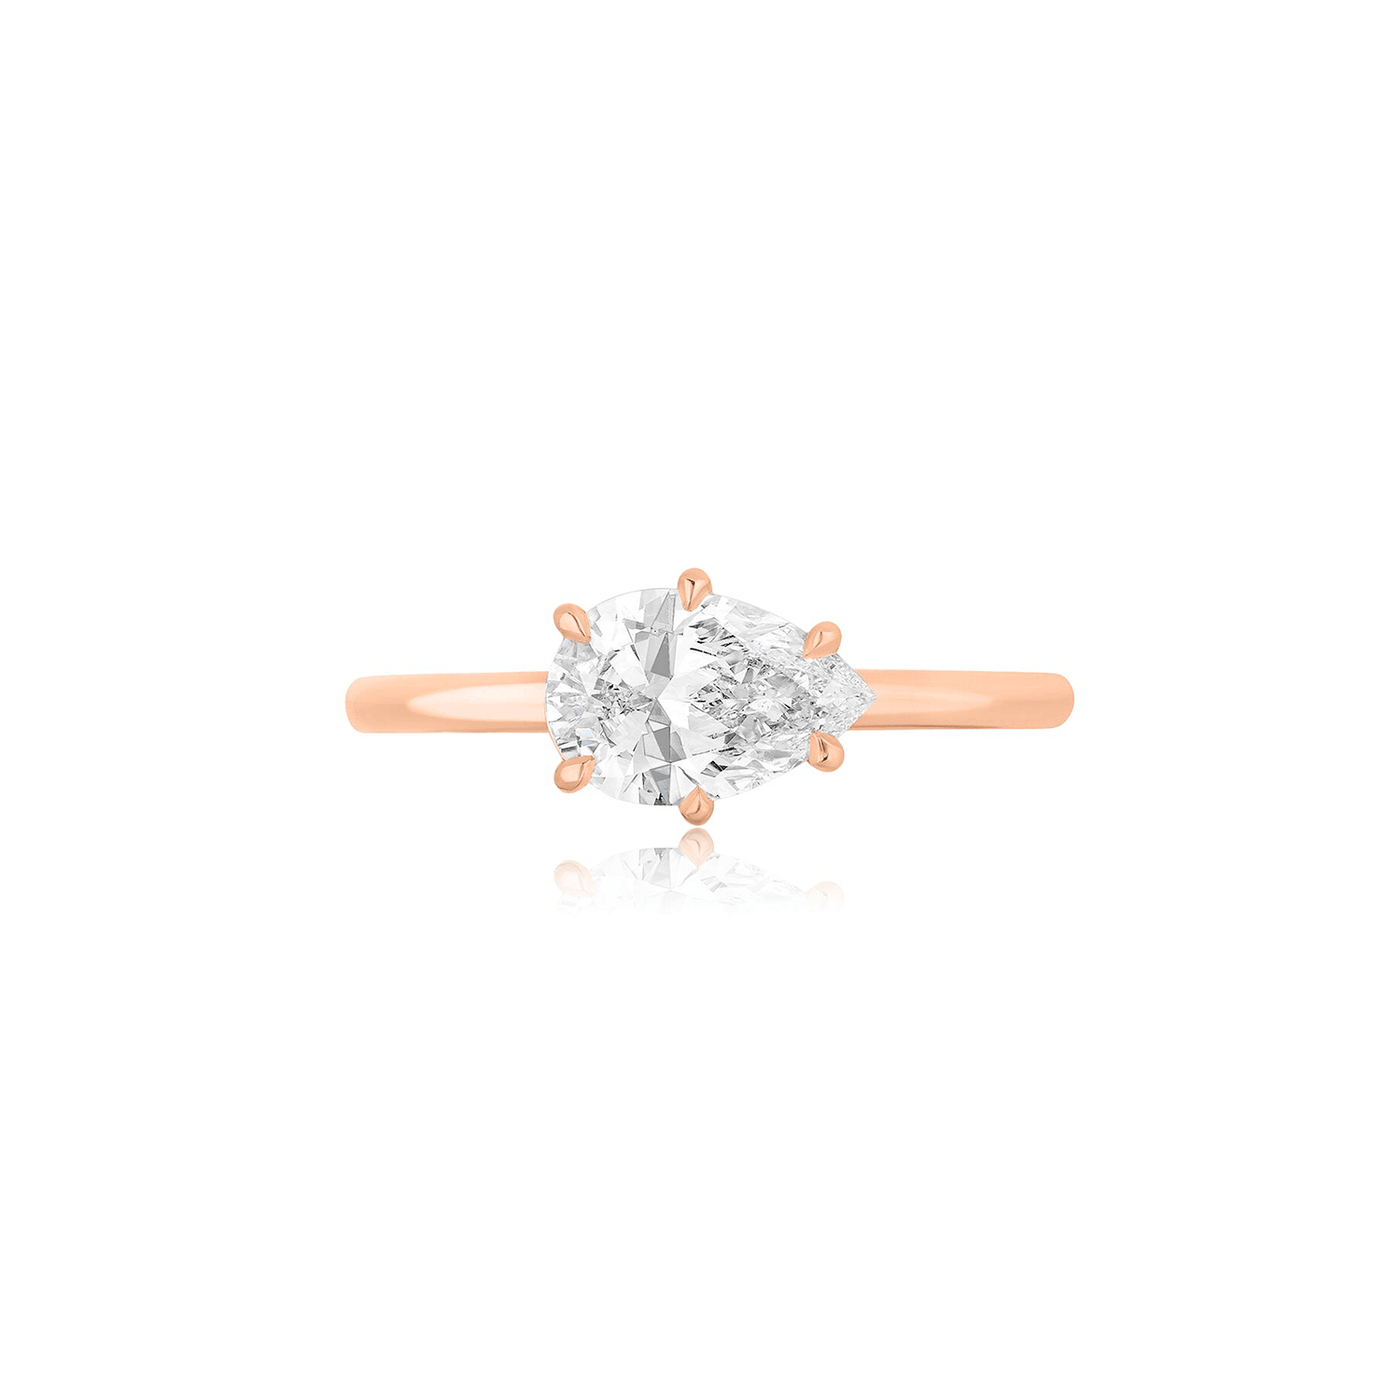 East-West Pear Diamond Engagement Ring